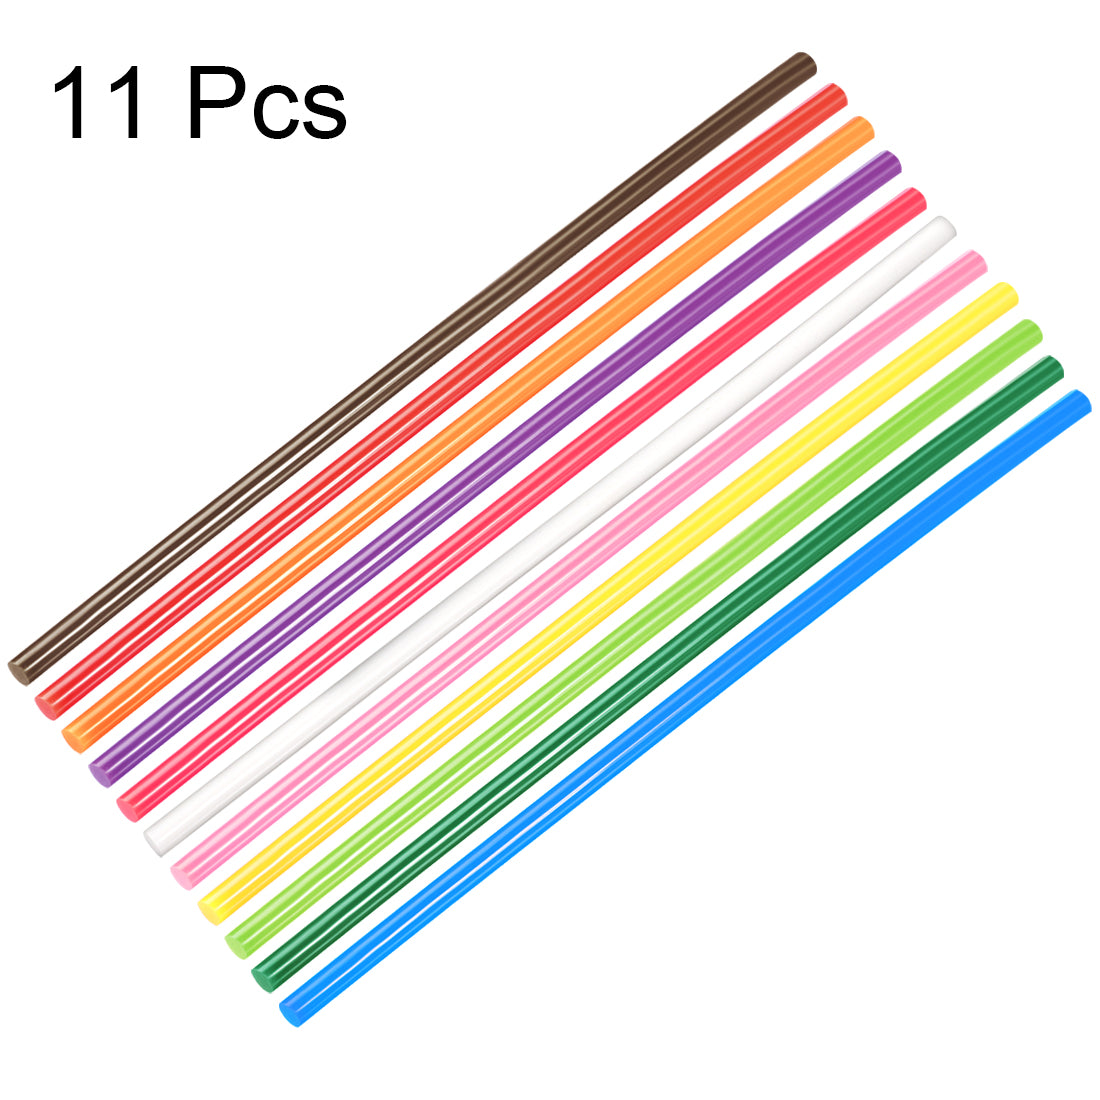 uxcell Uxcell Colorful Hot Melt Glue Gun Sticks, 250mm Long x 7mm Diameter,for Most Glue Guns, Perfect for DIY Craft Projects and Sealing,11pcs